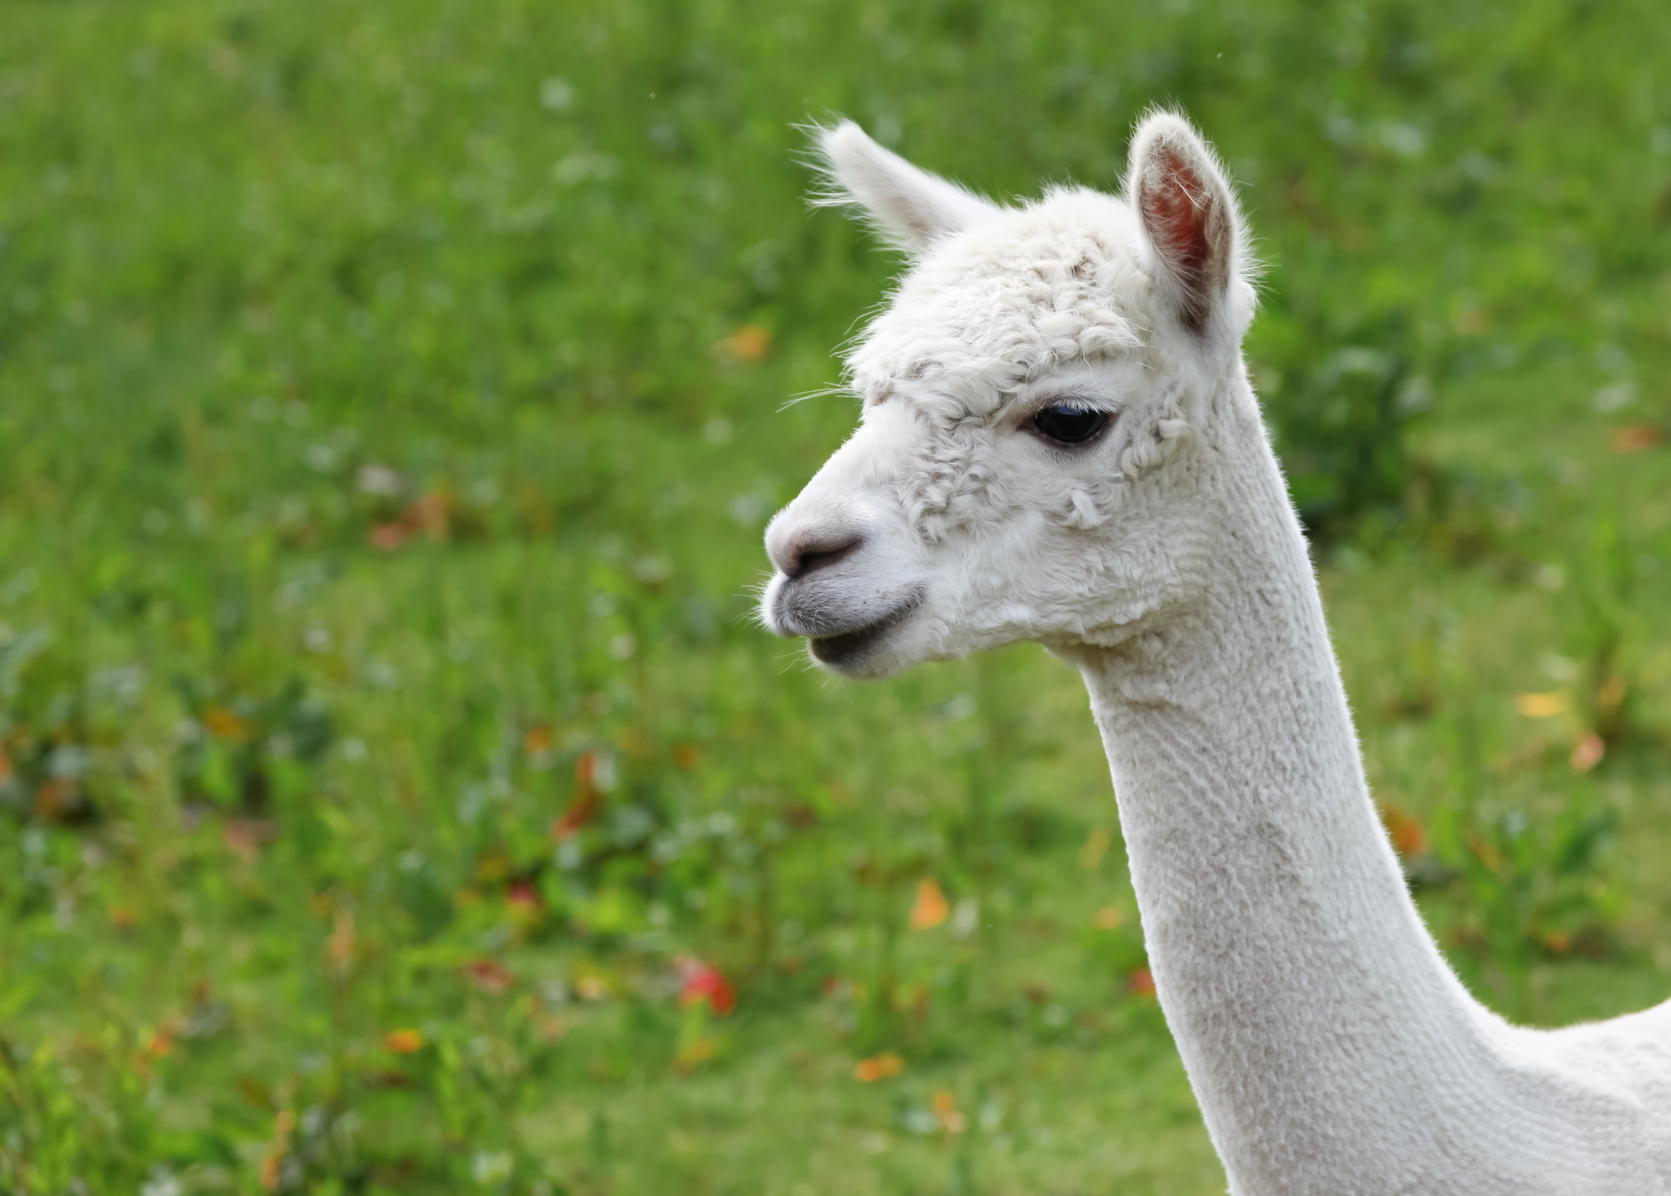 7 Quick Takes Friday (vol. 40): some music, a tweet, and, um…llamas. well, sort of.